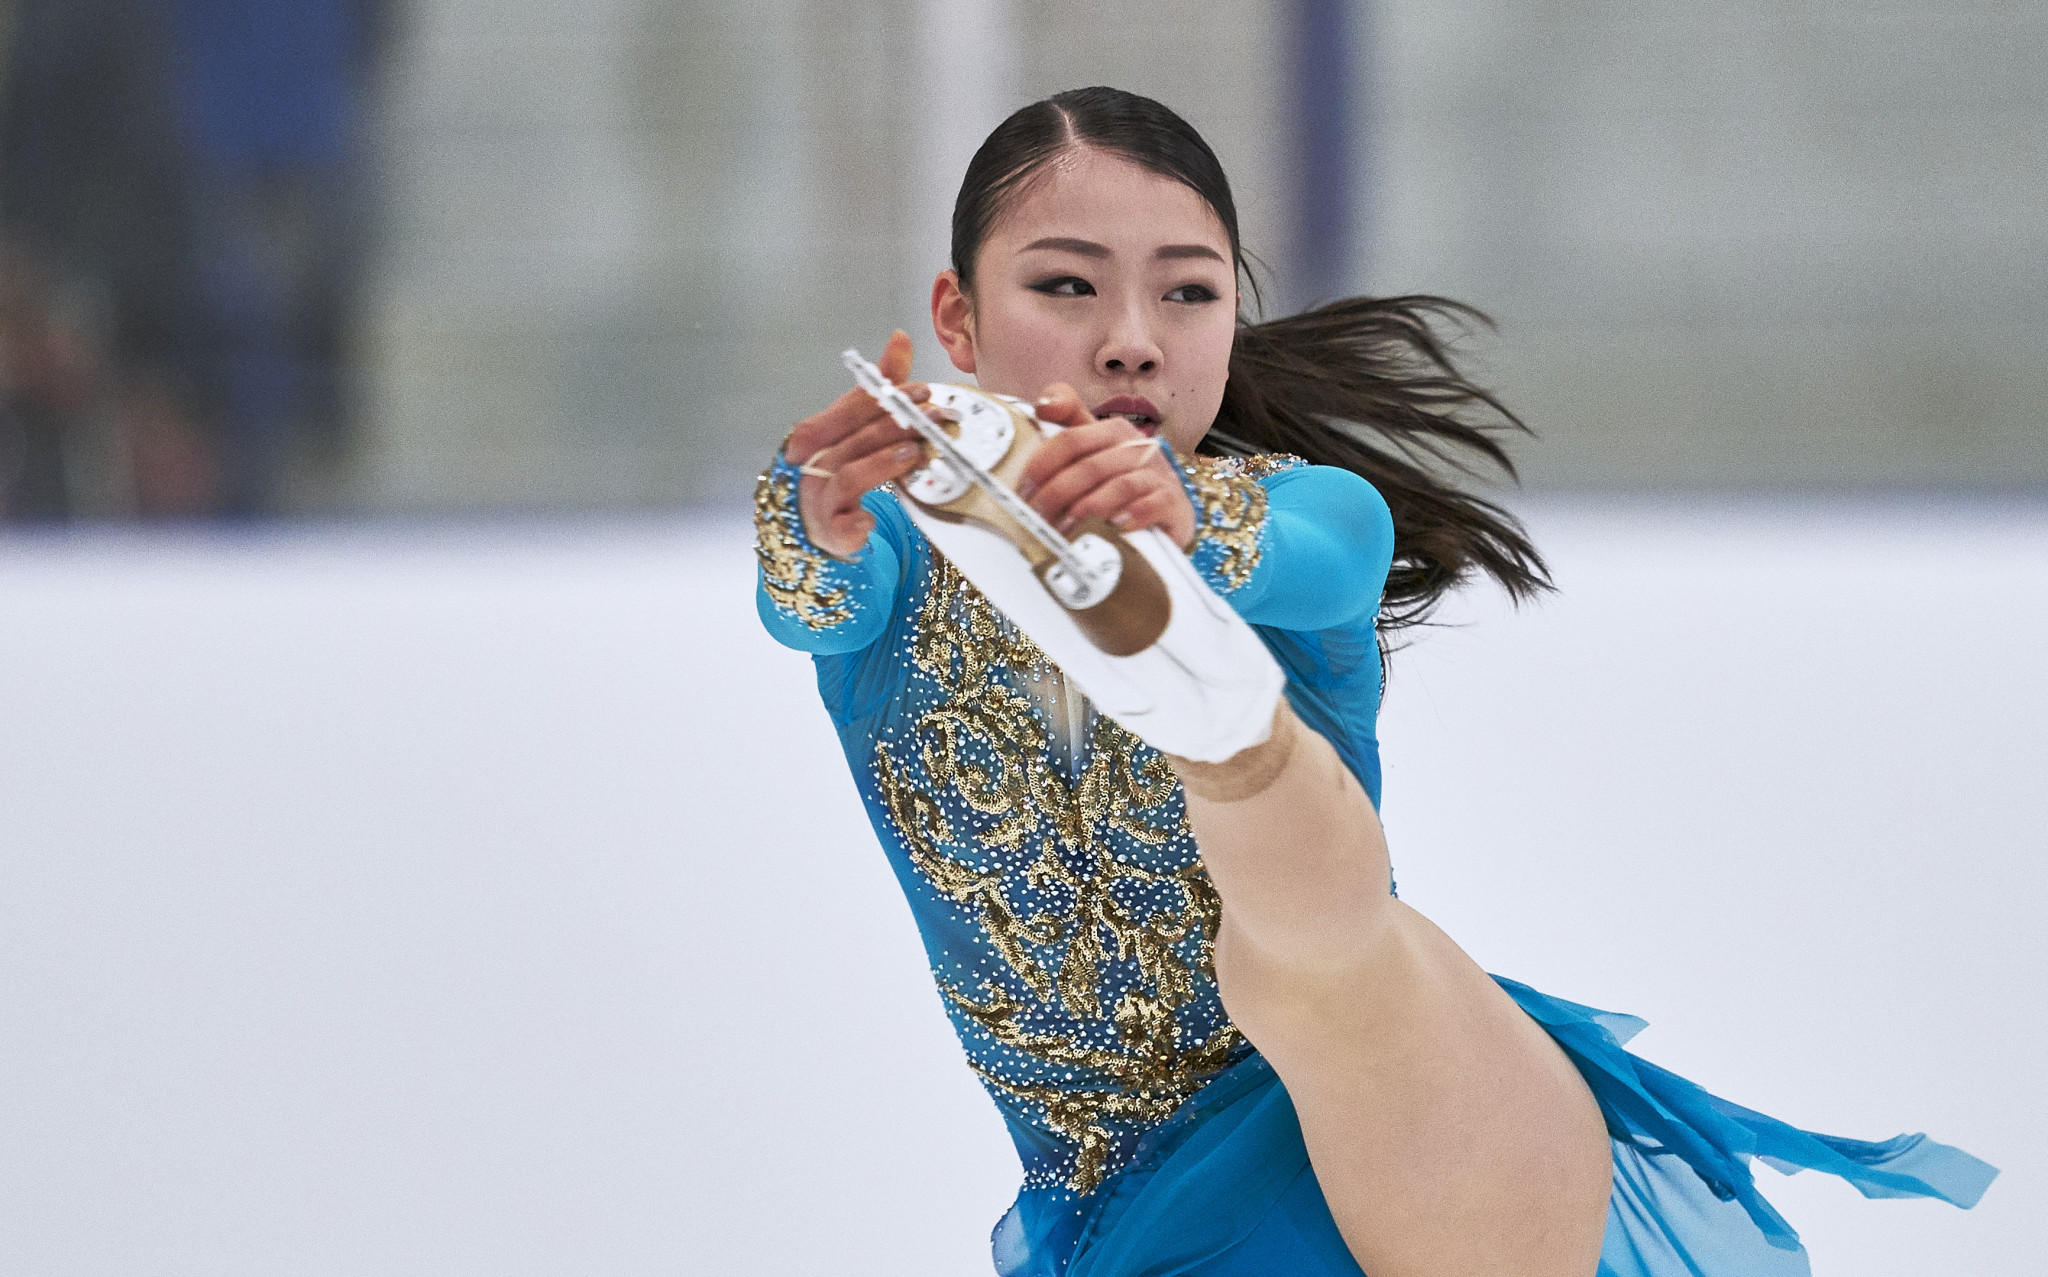 Rika Kihira of Japan will be a main contender in the women's competition at Skate Canada ©Getty Images